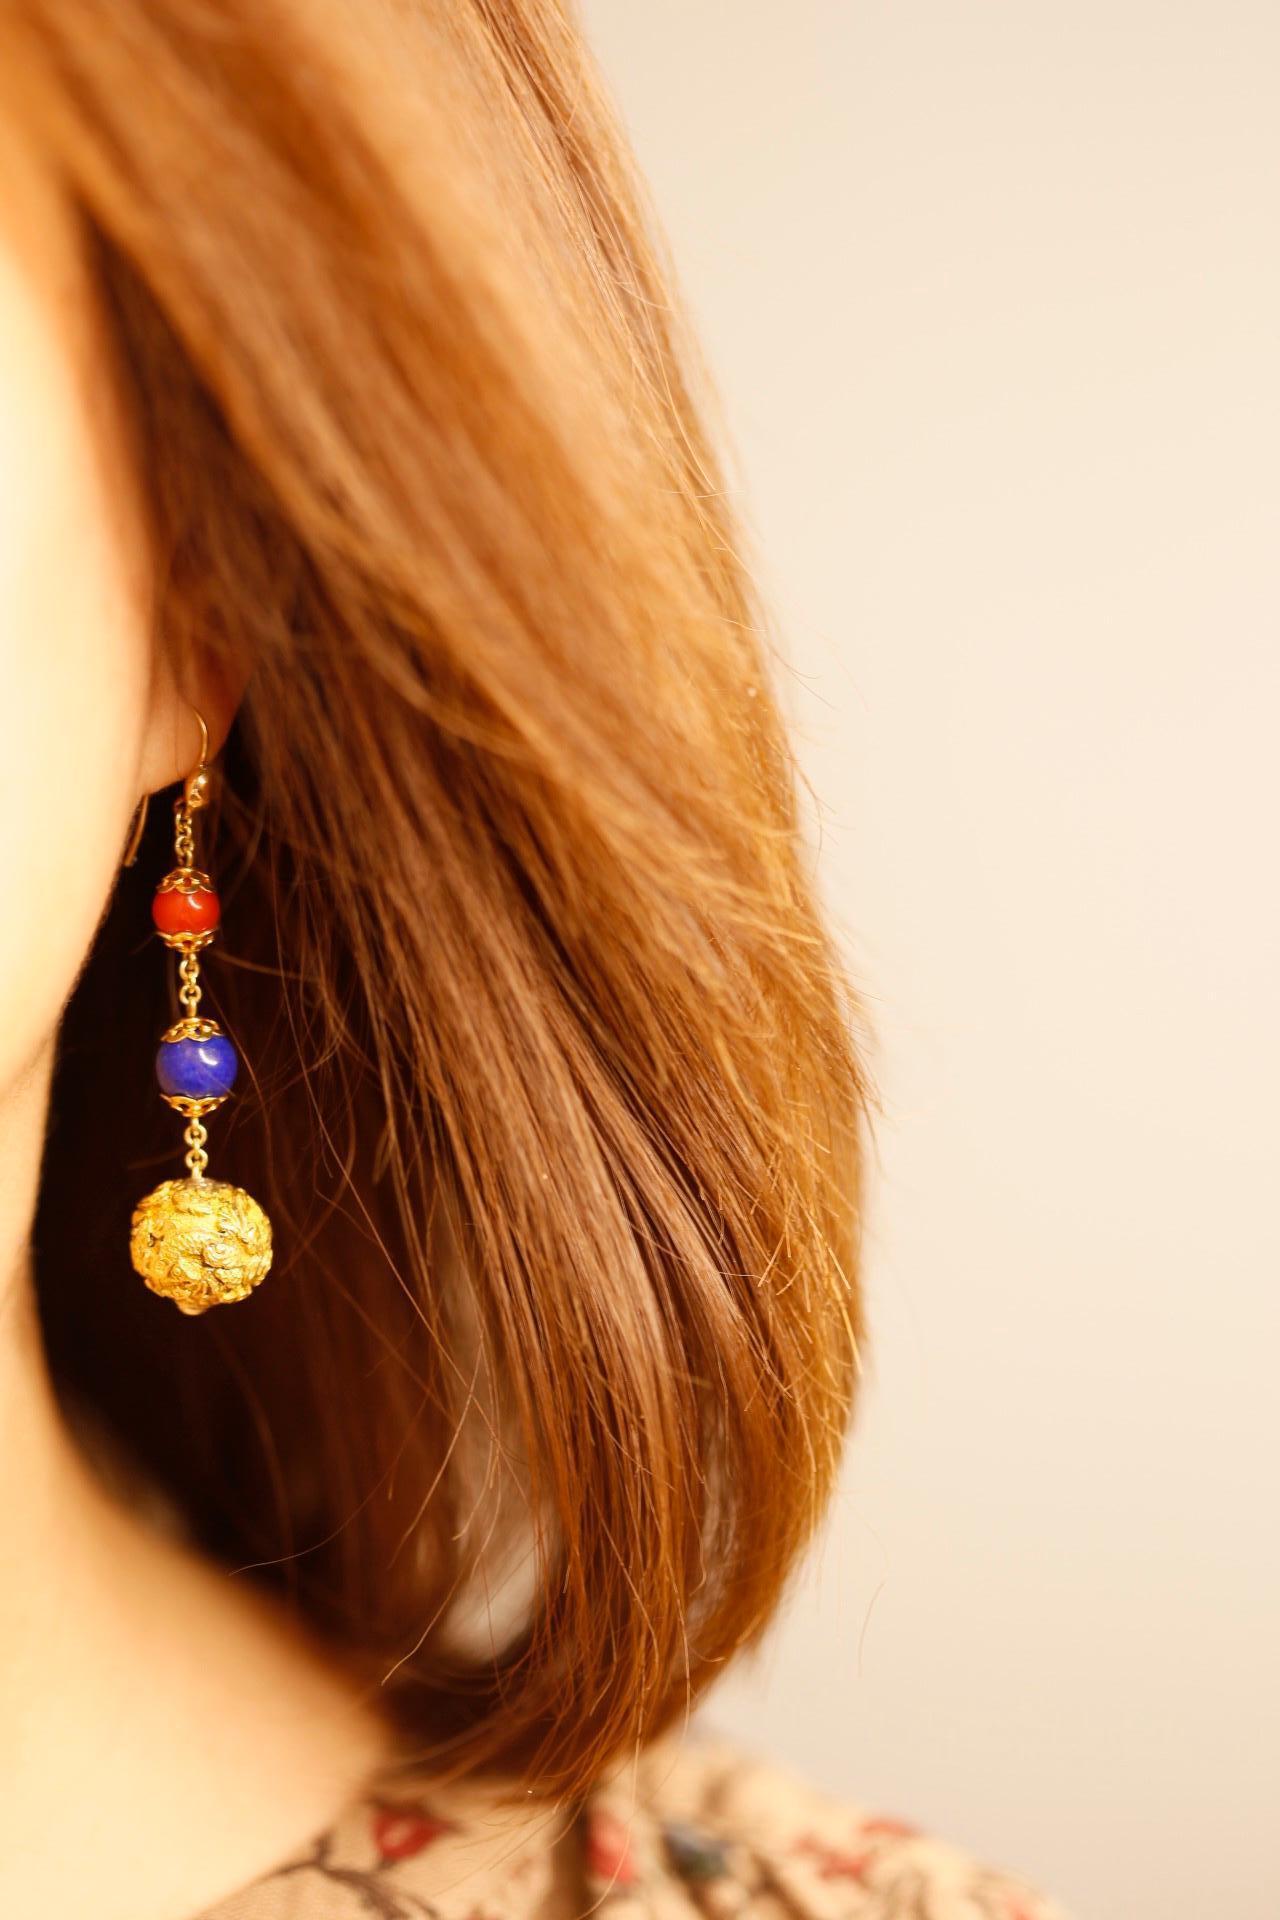 Antique Carved 18K Gold, Coral and Lapis Drop Earrings bursting with vivid colours and timeless style


The phenomenal antique carved 18K yellow gold beads have such a unique and fine detailing. This lures you in for a closer look. The earrings